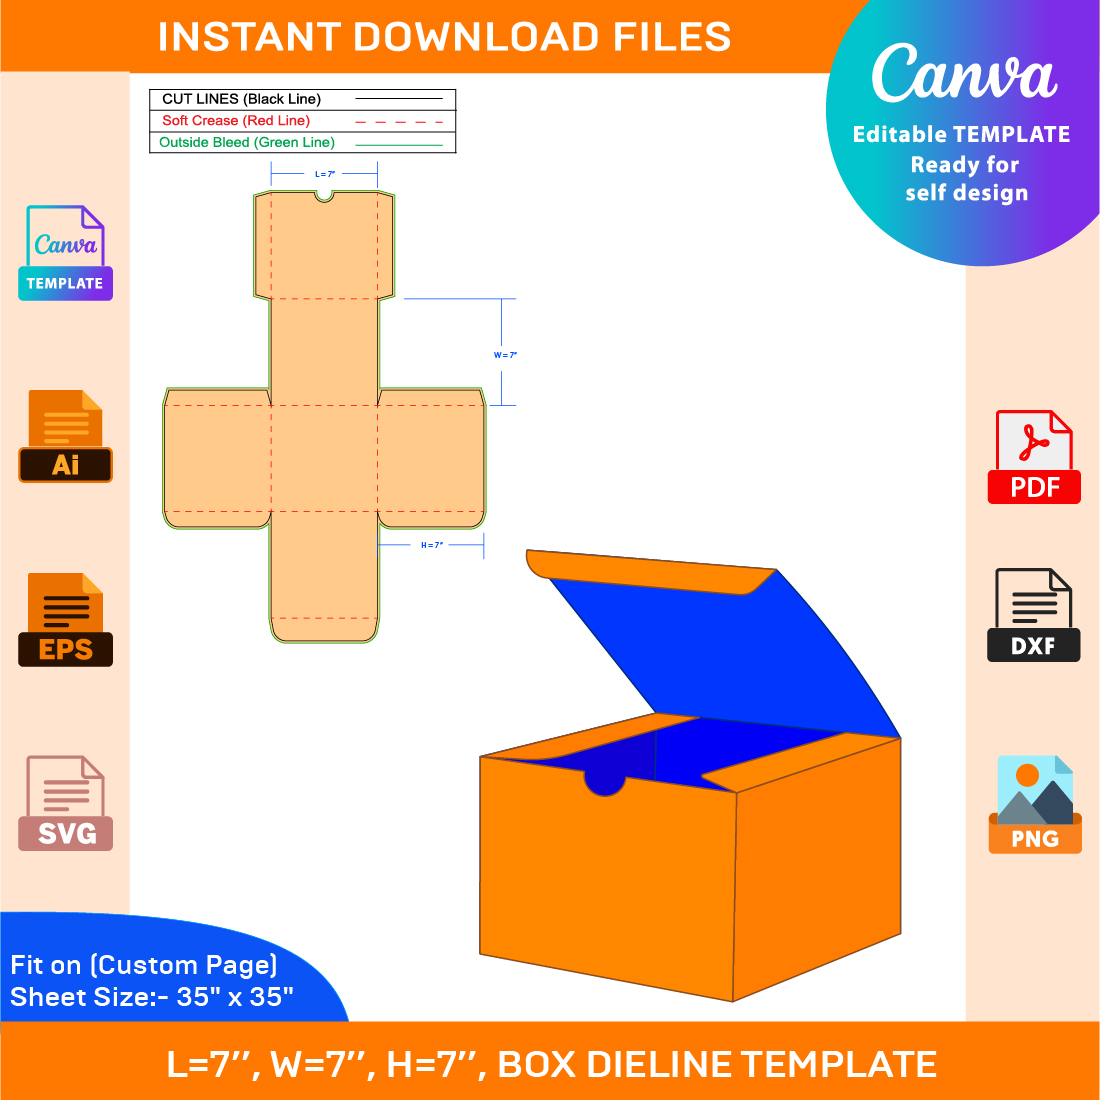 Gift Box, Dieline Template, SVG, EPS, PDF, DXF, Ai, PNG, JPEG cover image.